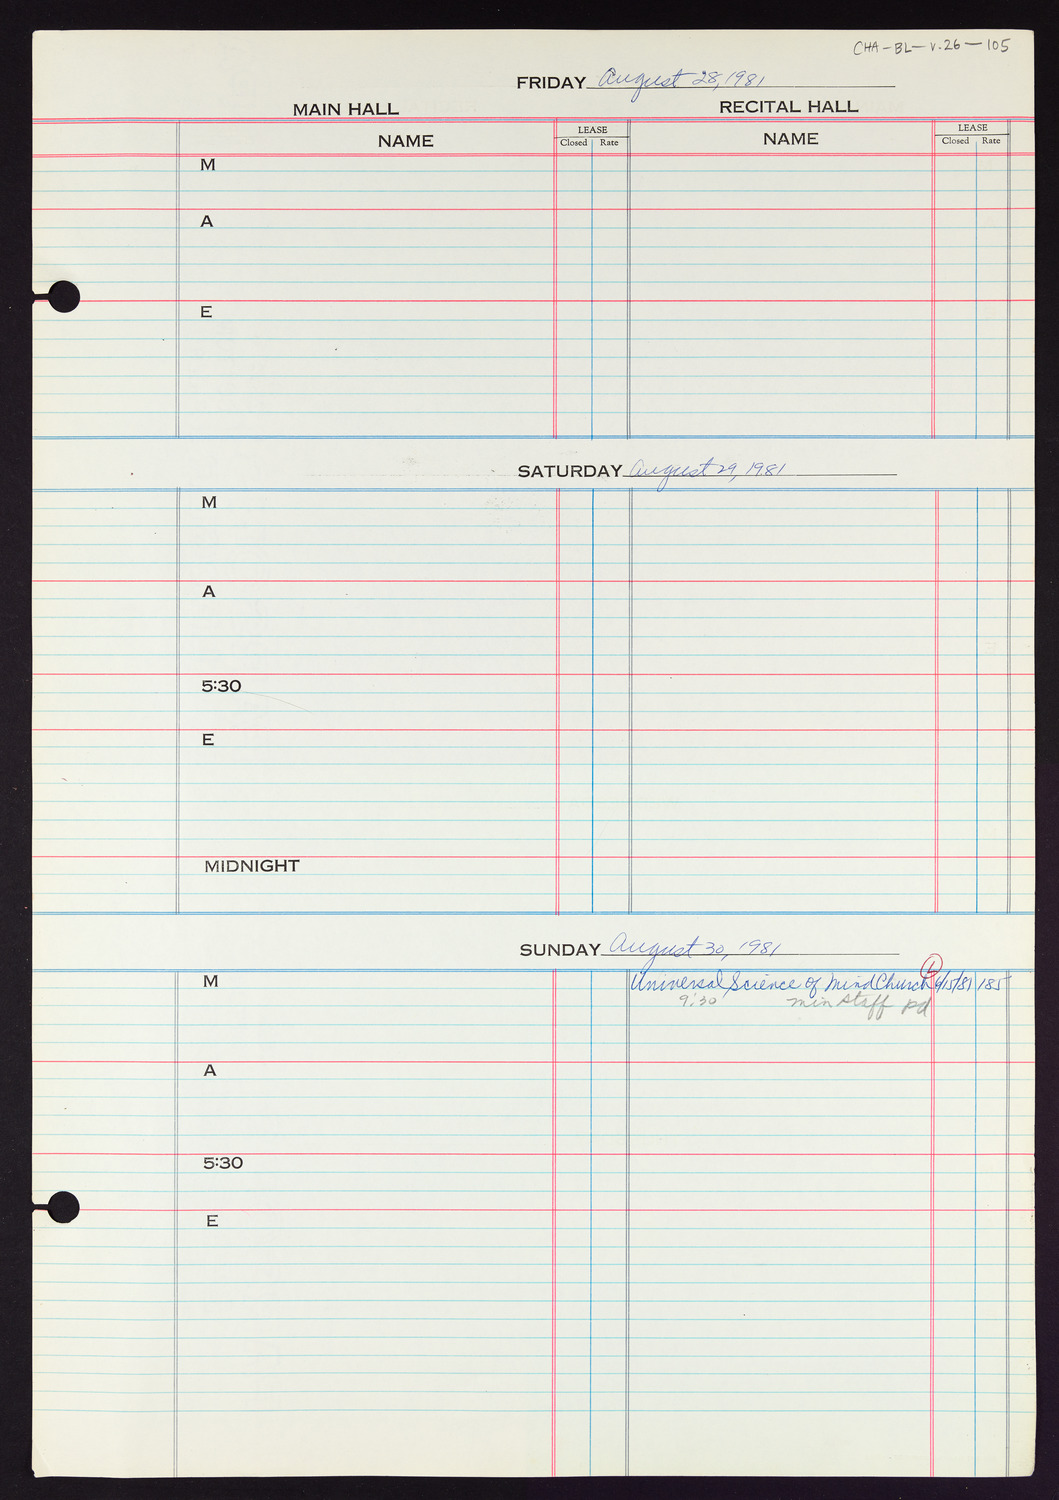 Carnegie Hall Booking Ledger, volume 26, page 105